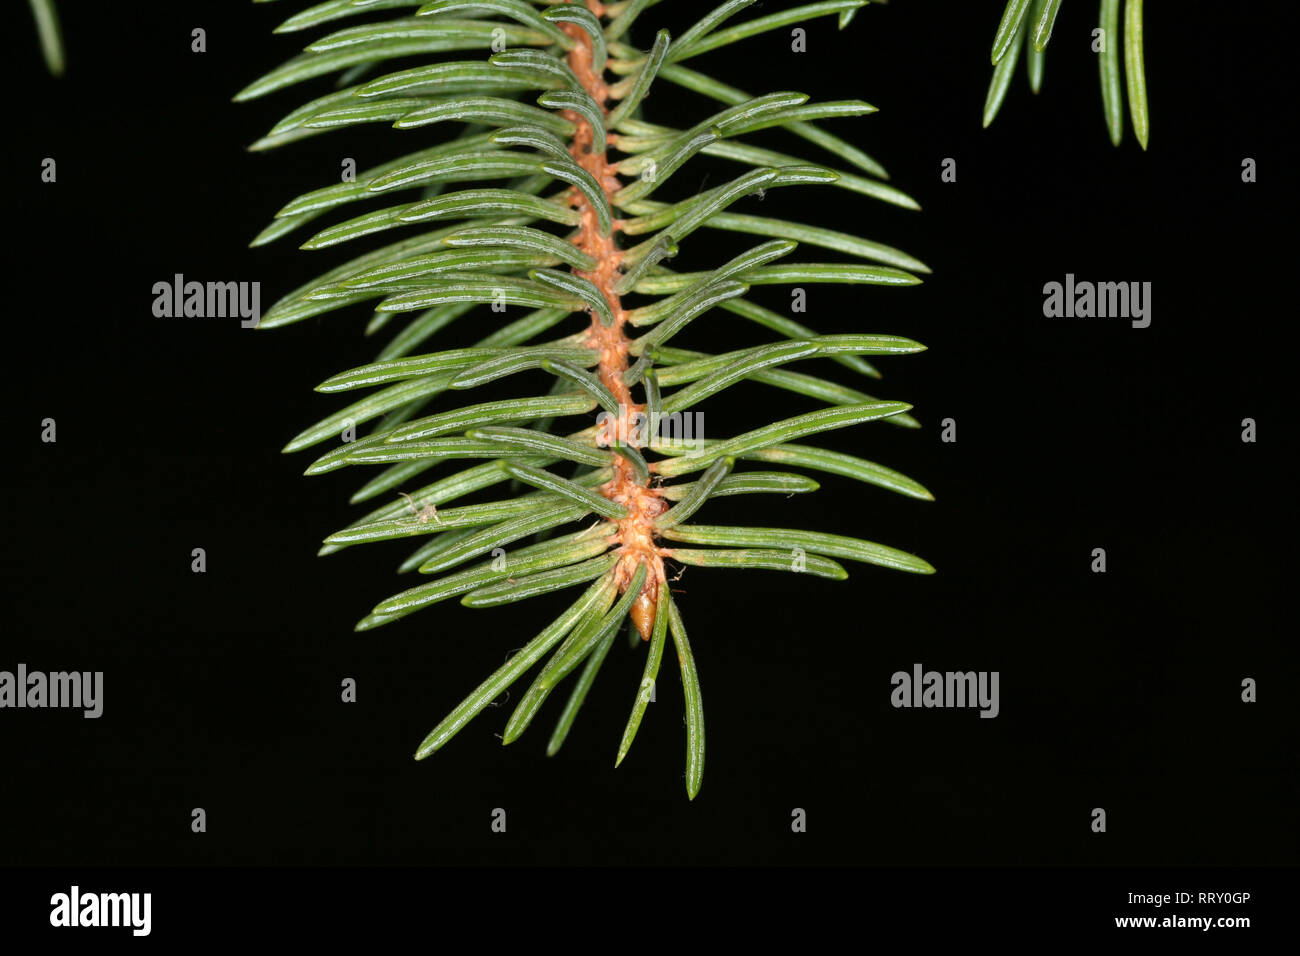 Silver spruce Picea pungens needle in close up view on dark background Stock Photo